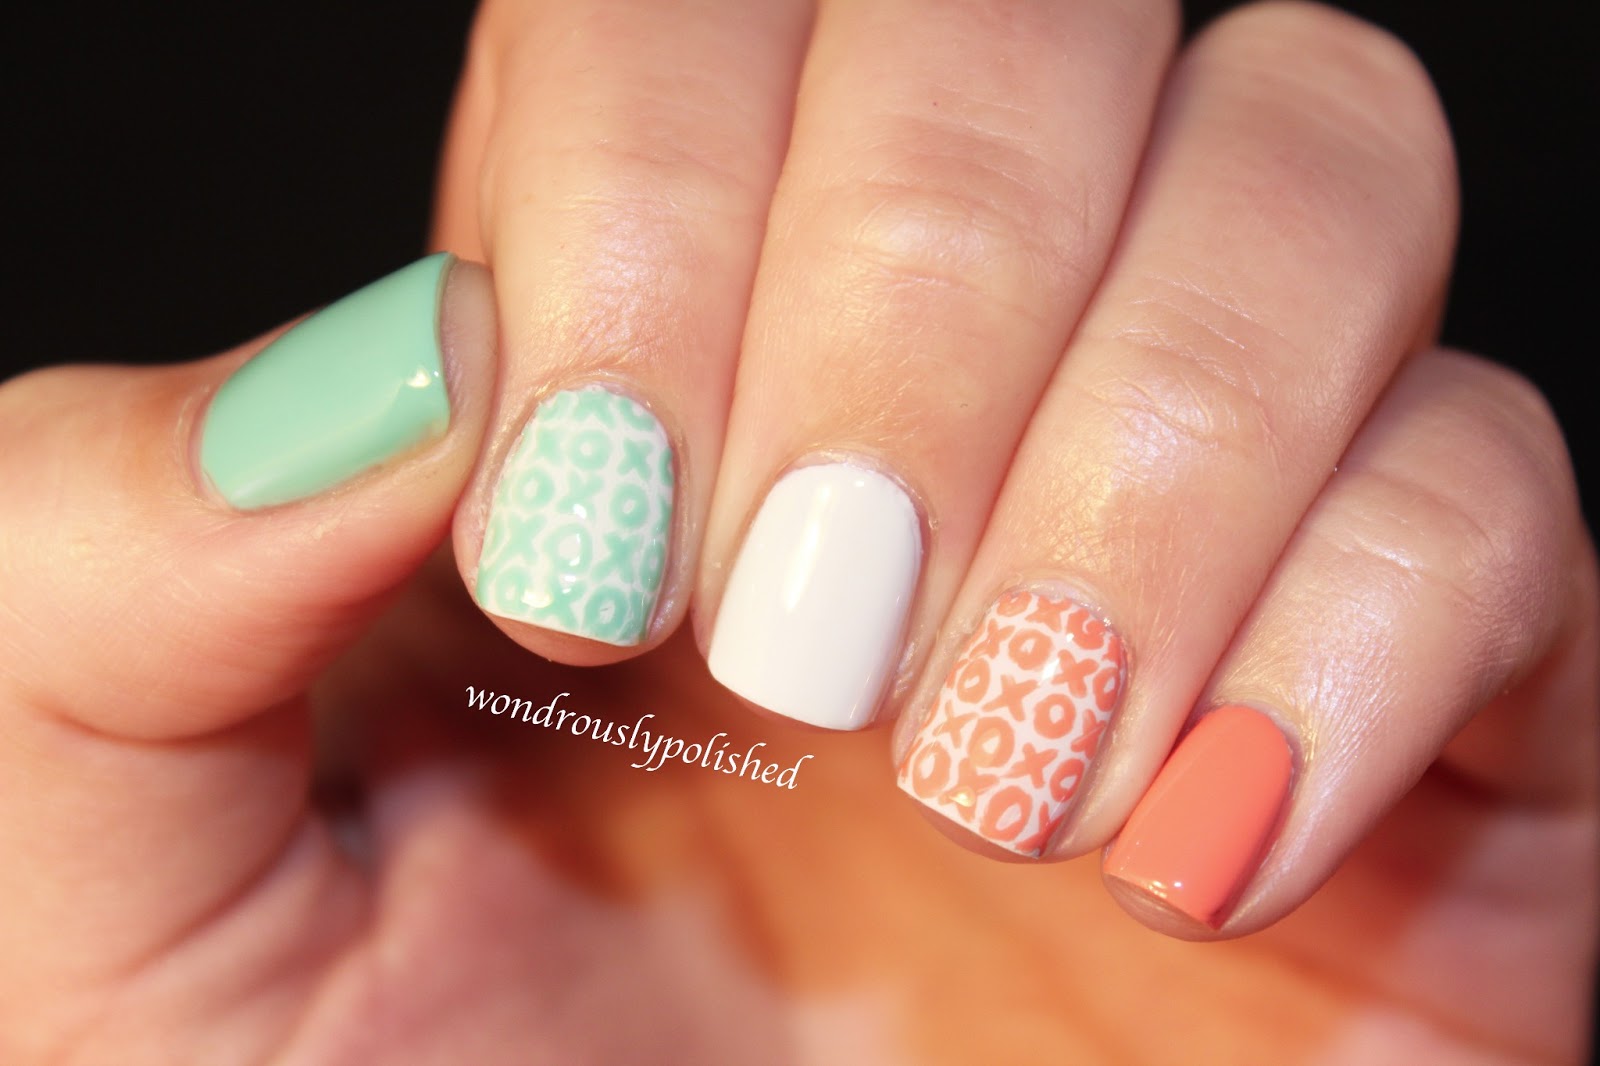 4. "February Nail Color Ideas: Inspiration for Your Next Manicure" - wide 3